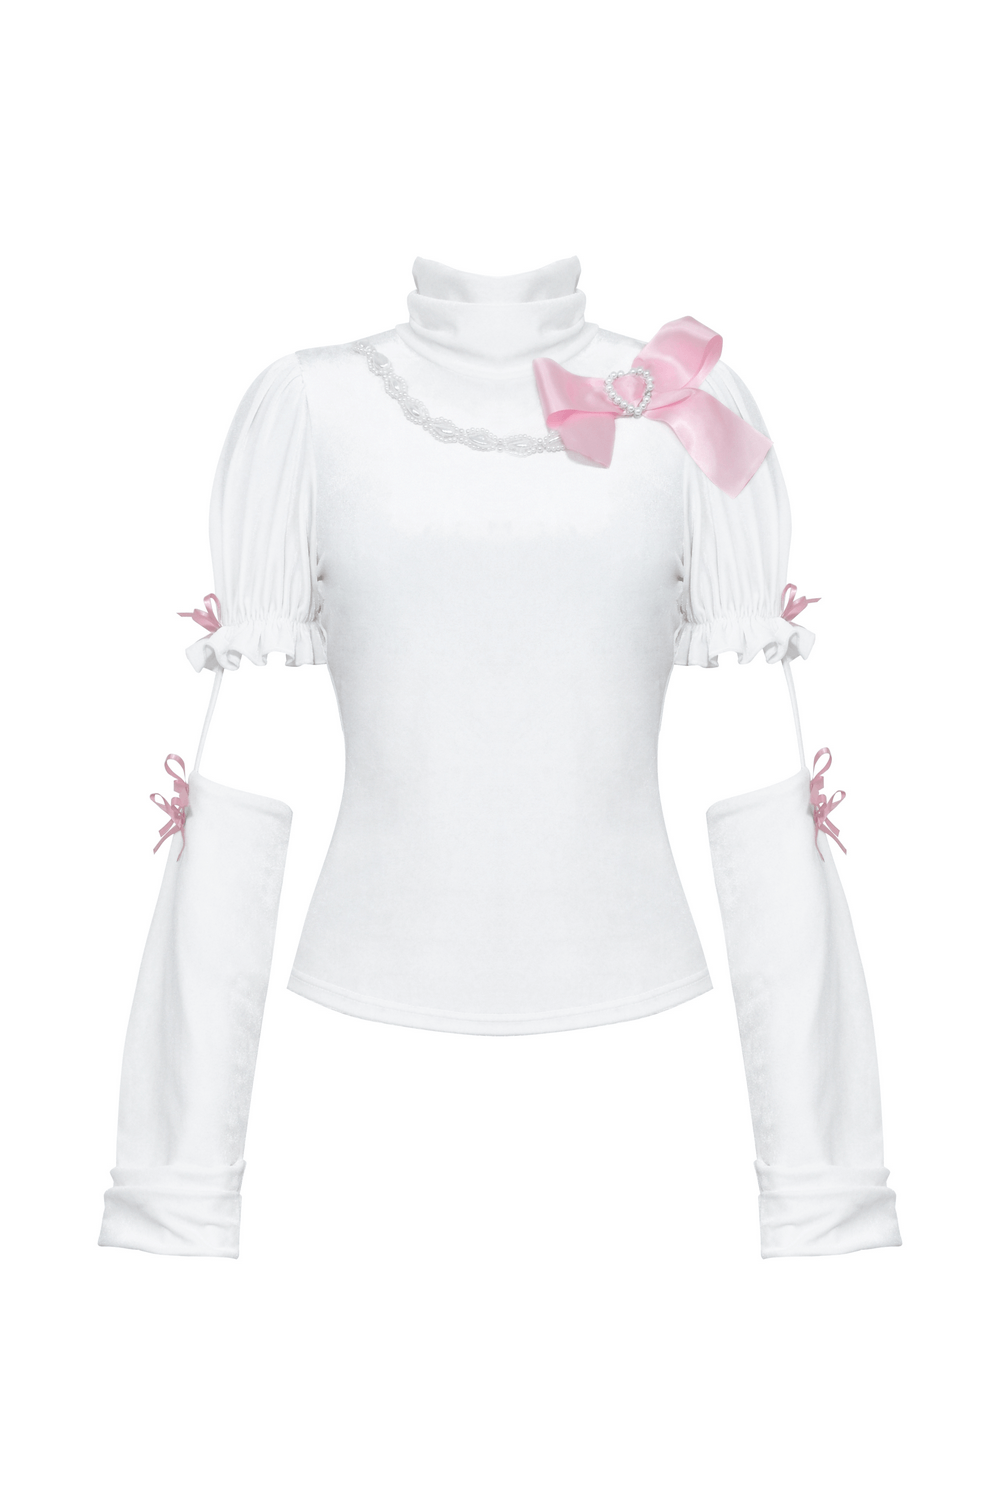 Elegant White Turtleneck Top with Pink Bow Accents